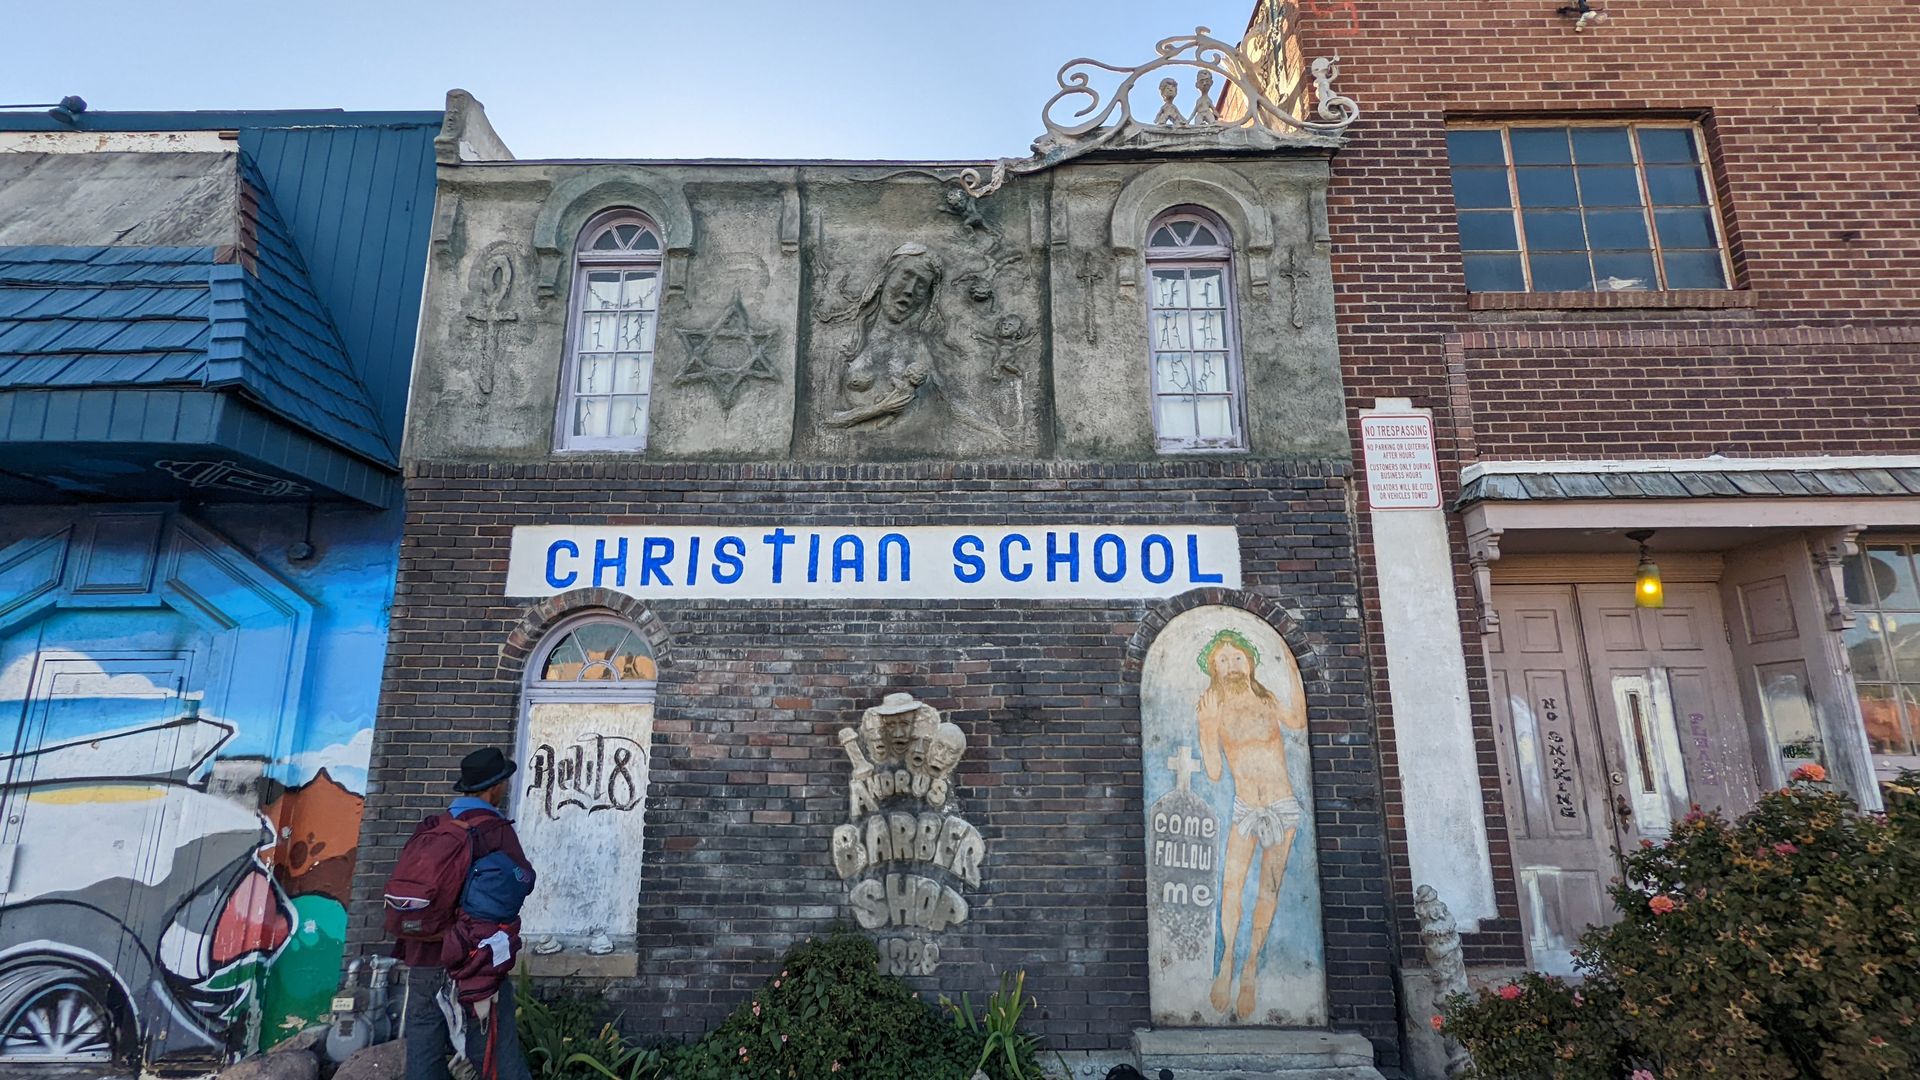 A building facade has attached sculptures of a woman, a star of David and a barbershop quartet, alongside a painting of Jesus. A sign says "Christian School." a 